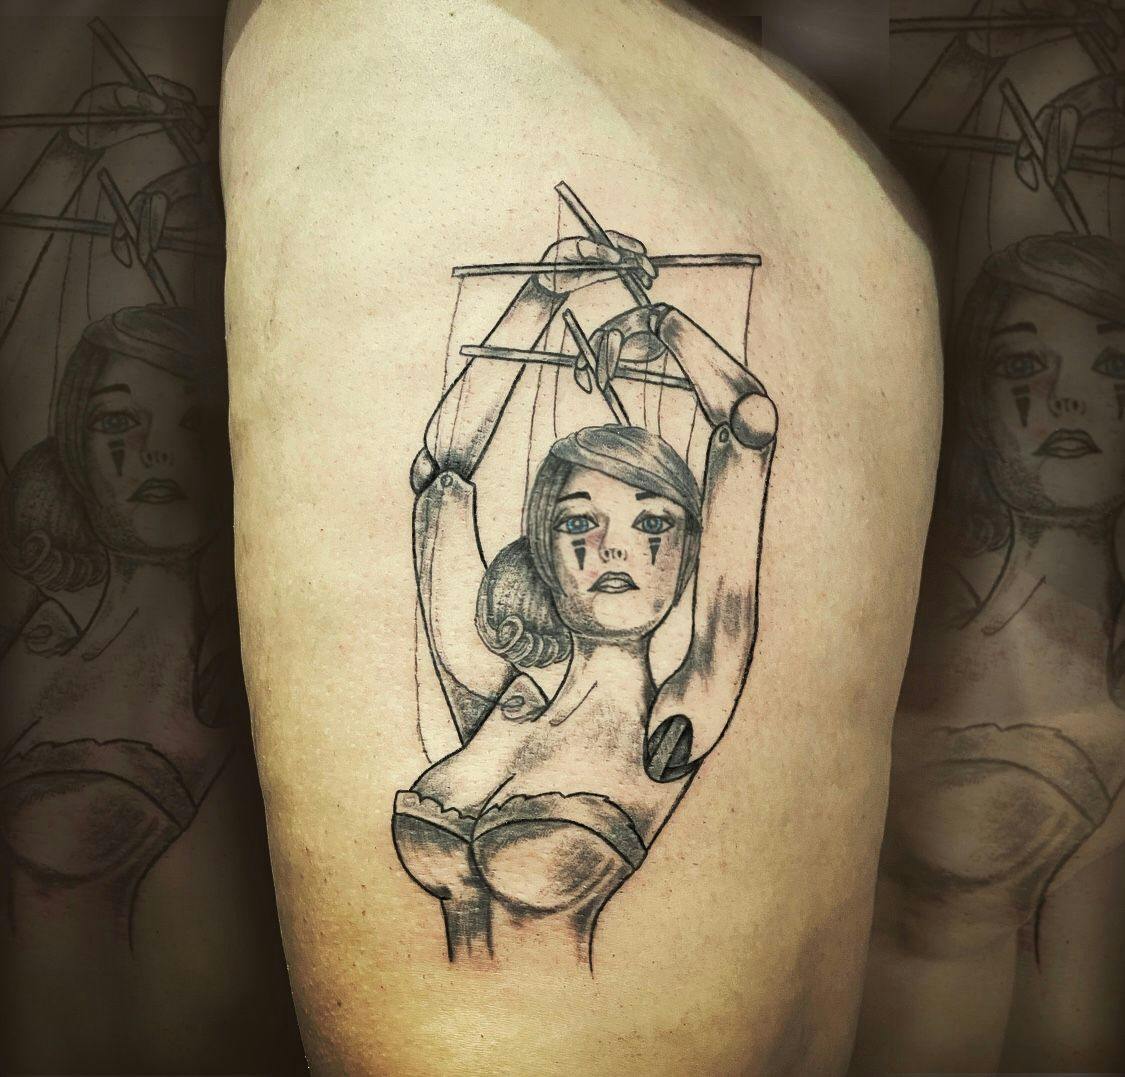 a narben tattoo of a woman holding a sword, enzkreis, germany